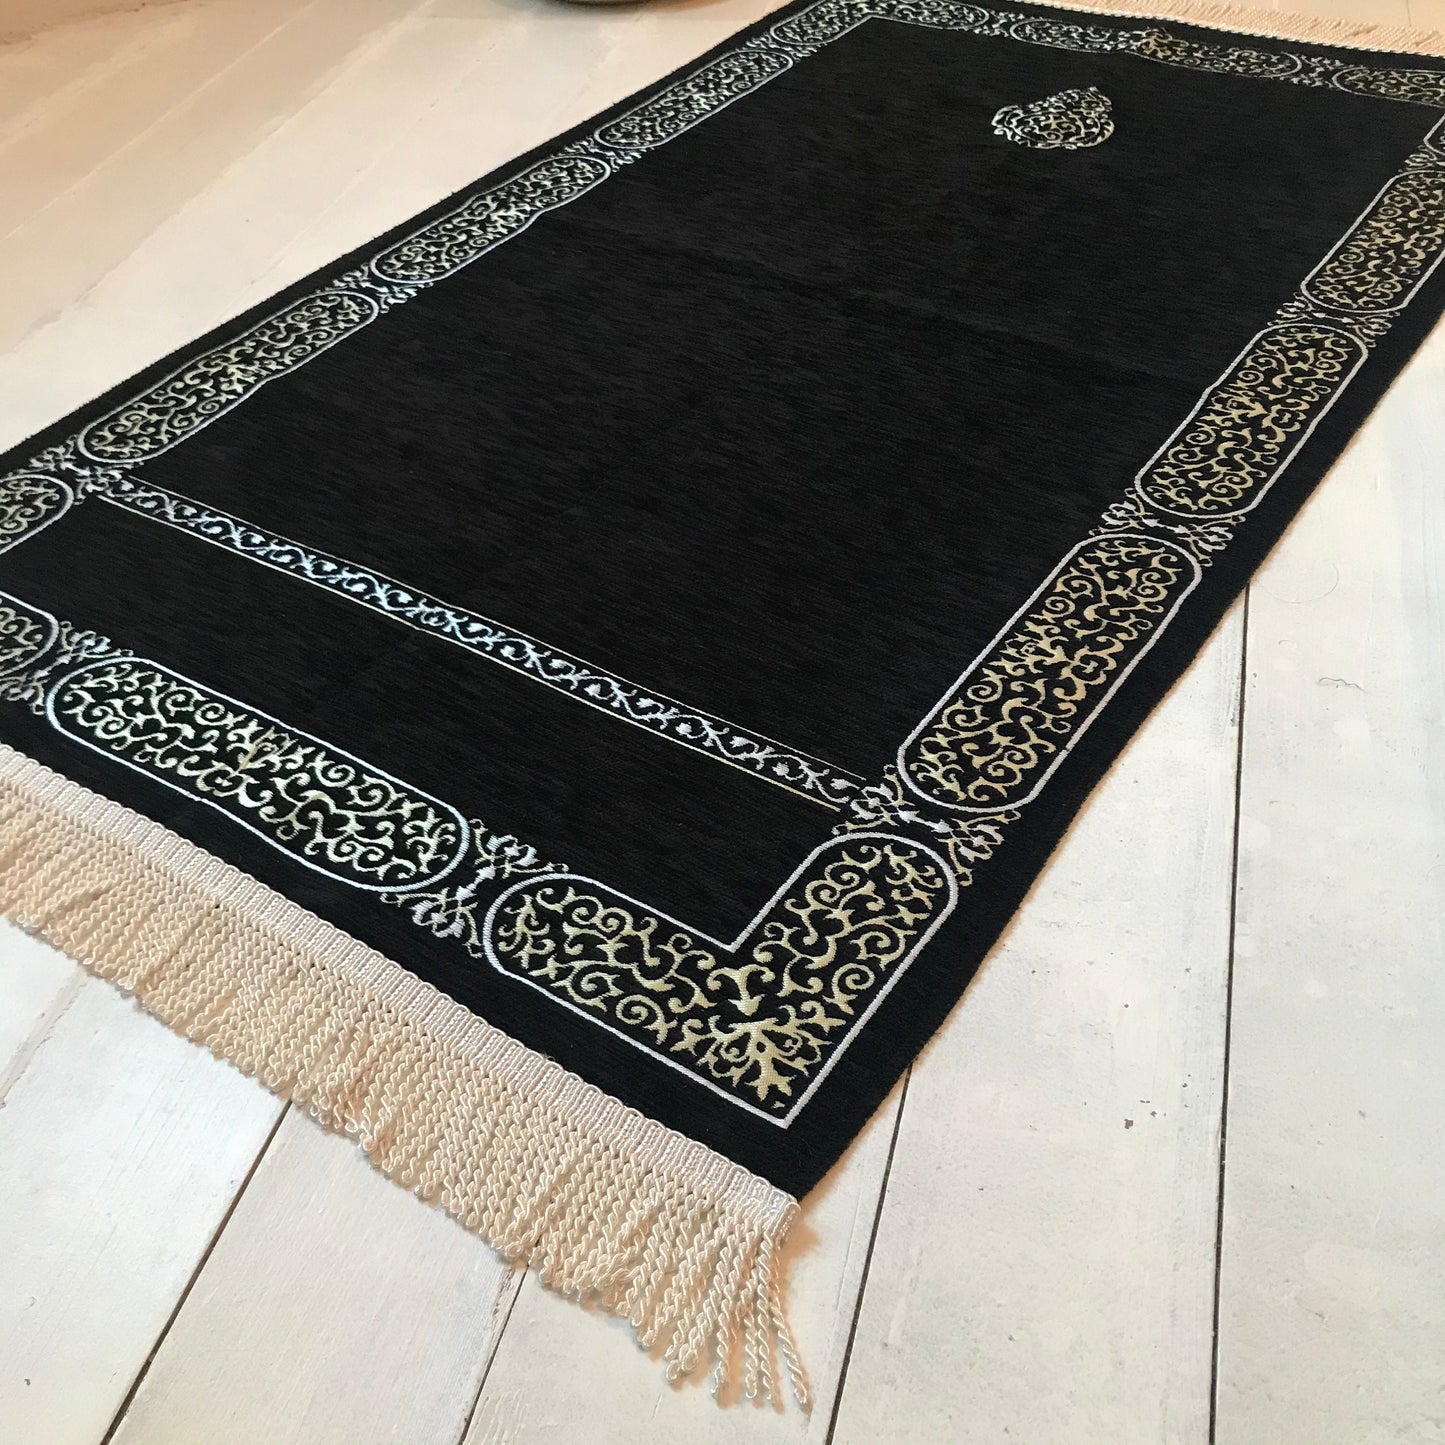 Kaaba Patterned Embroidered Prayer Rug With a Gift Bag